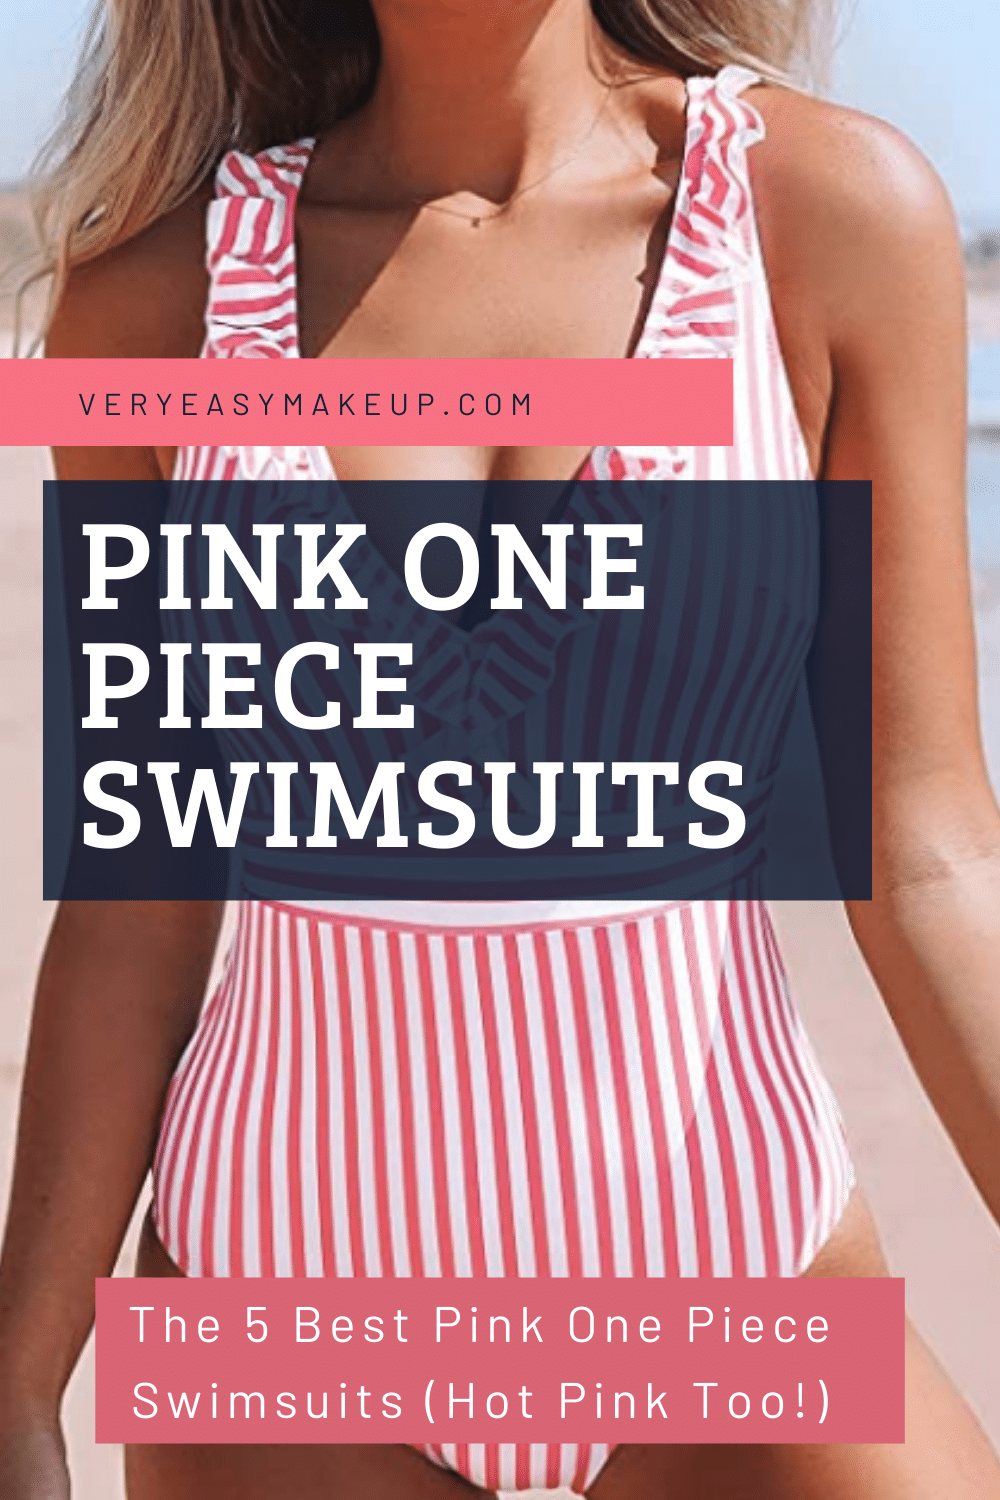 The 5 Best Pink One Piece Swimsuits by Very Easy Makeup